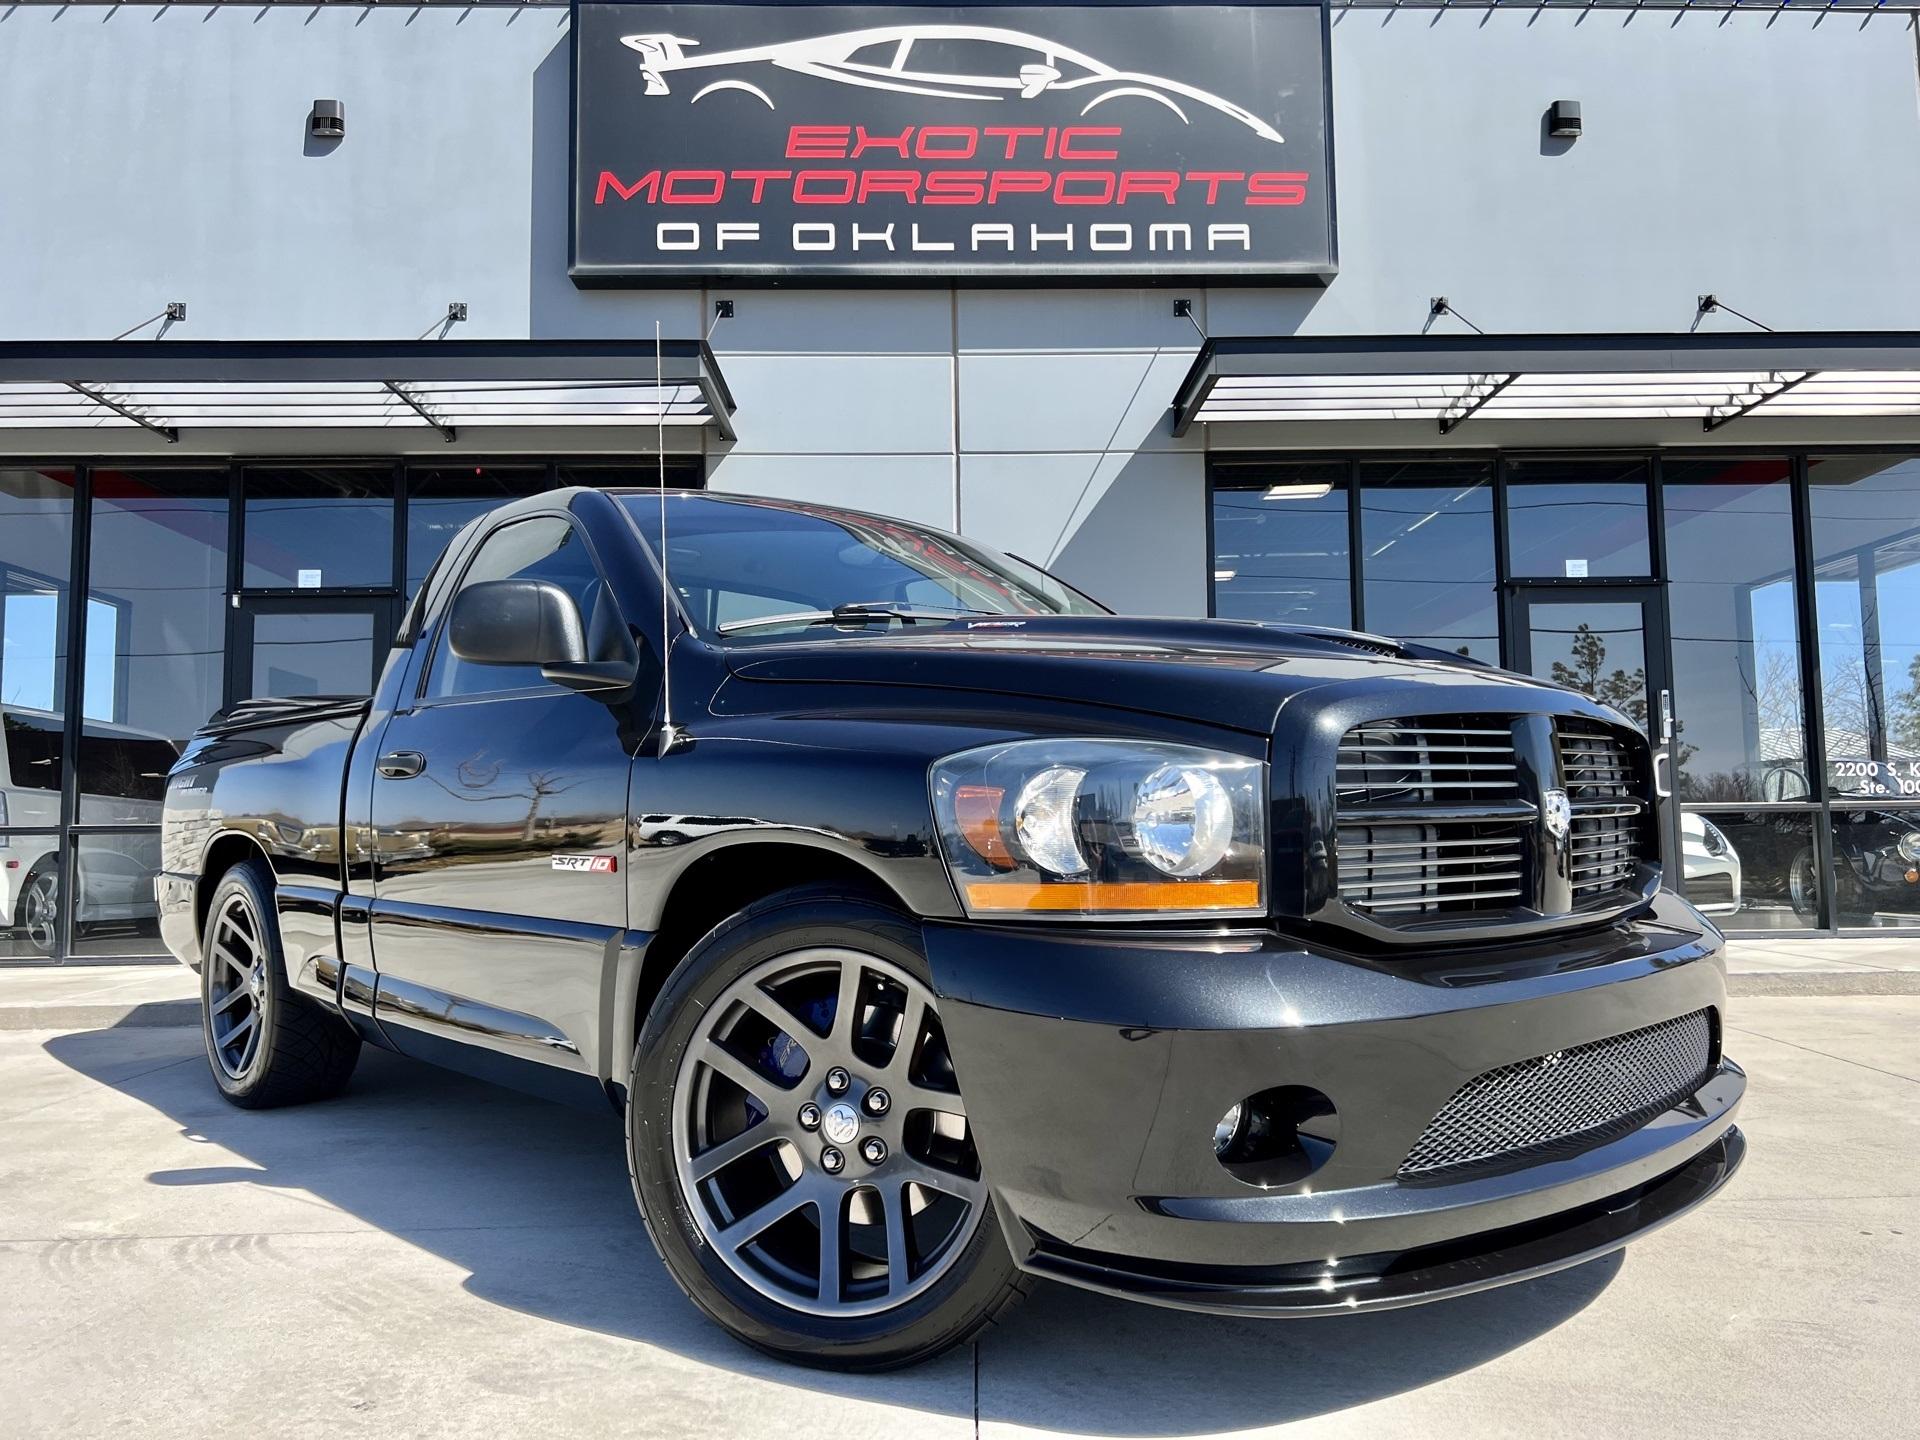 Used 2006 Dodge Ram 1500 SRT10 For Sale (Sold) Motorsports of Oklahoma Stock #A163